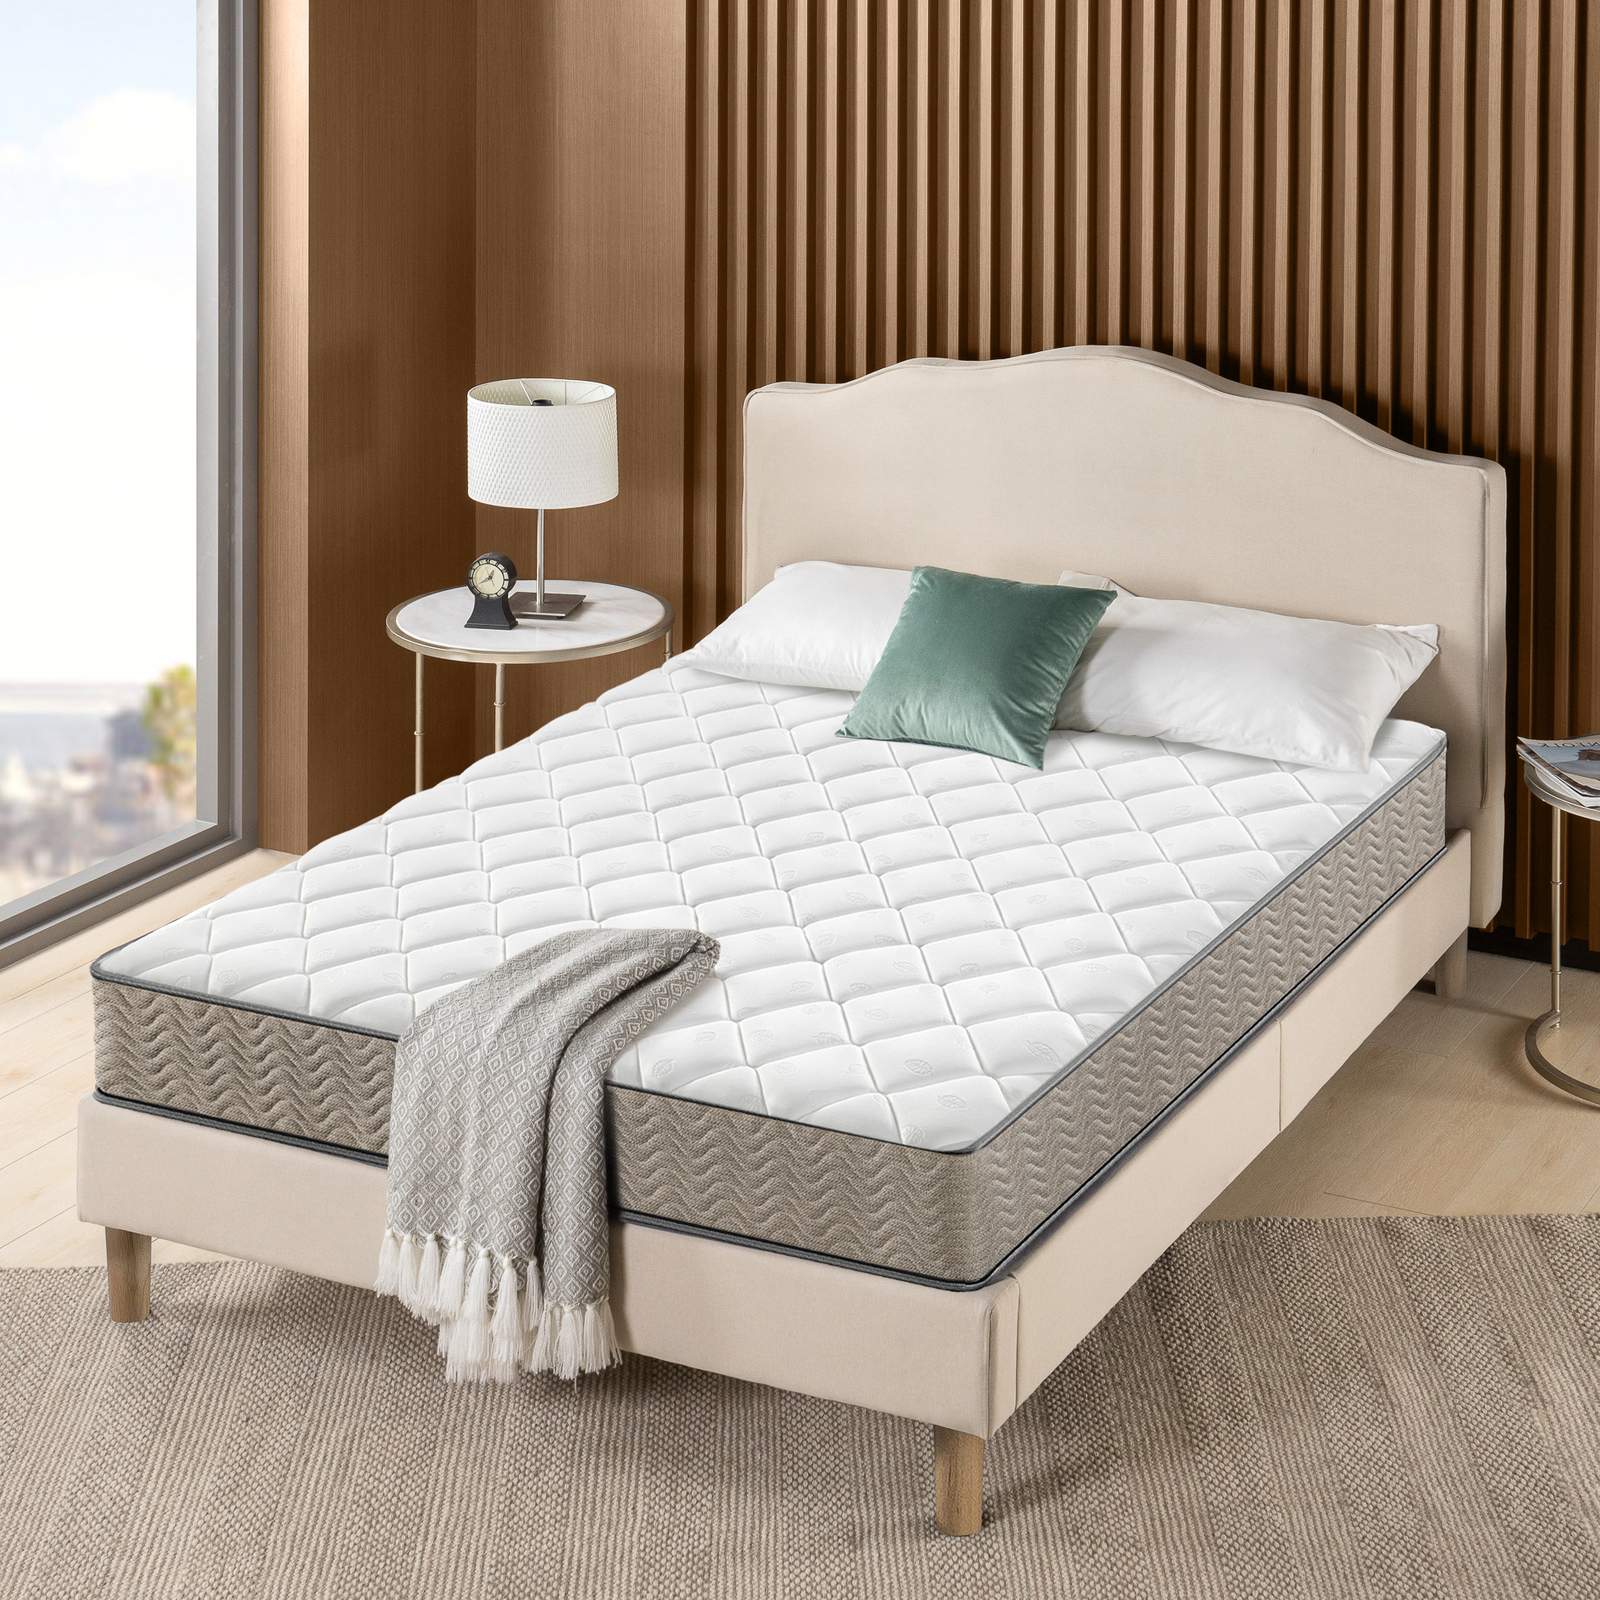 Supreme Comfort Innerspring Mattress (Double Size)